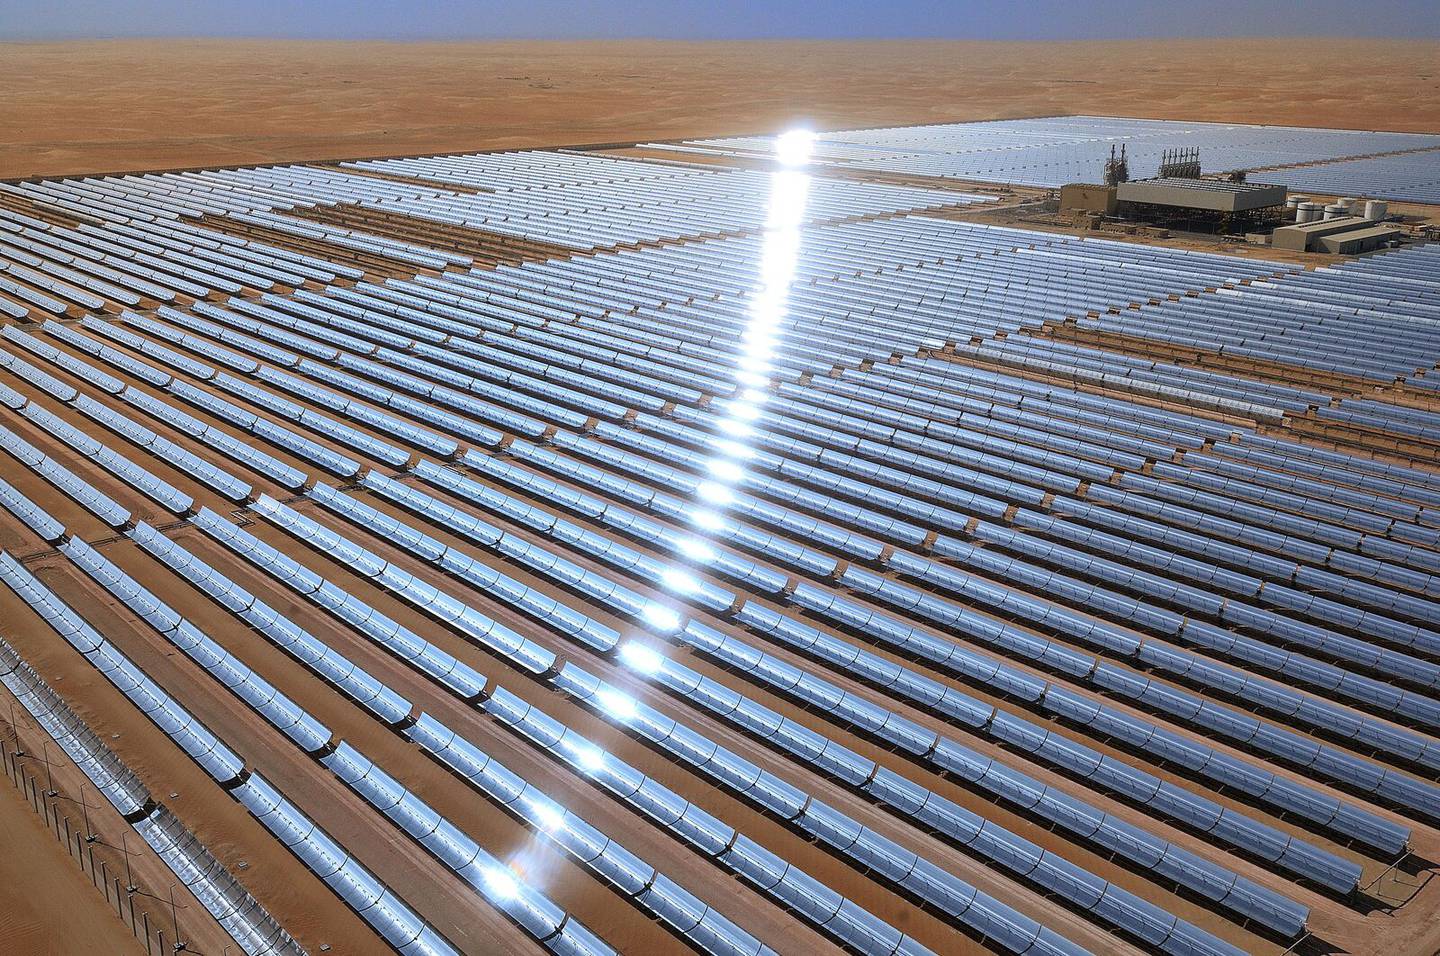 The UAE, a traditional fossil fuel provider, has also been expanding into renewables such as the huge Shams plant in Abu Dhabi. Photo: Masdar